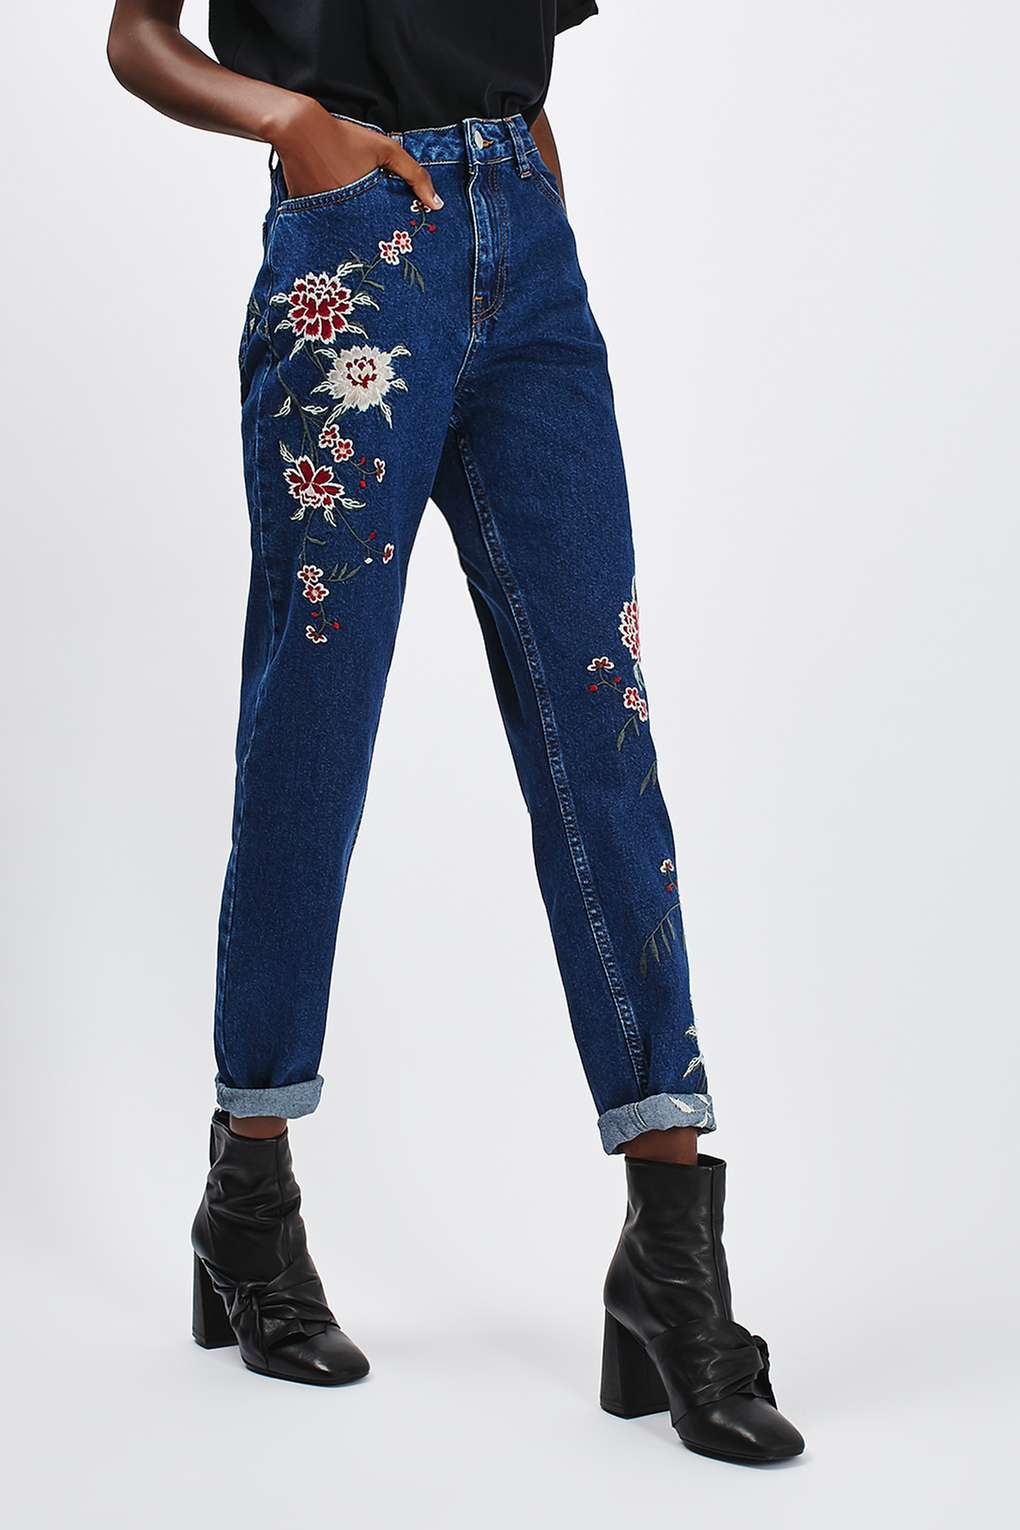 Topshop Moto EMbroidered Jeans.jpg